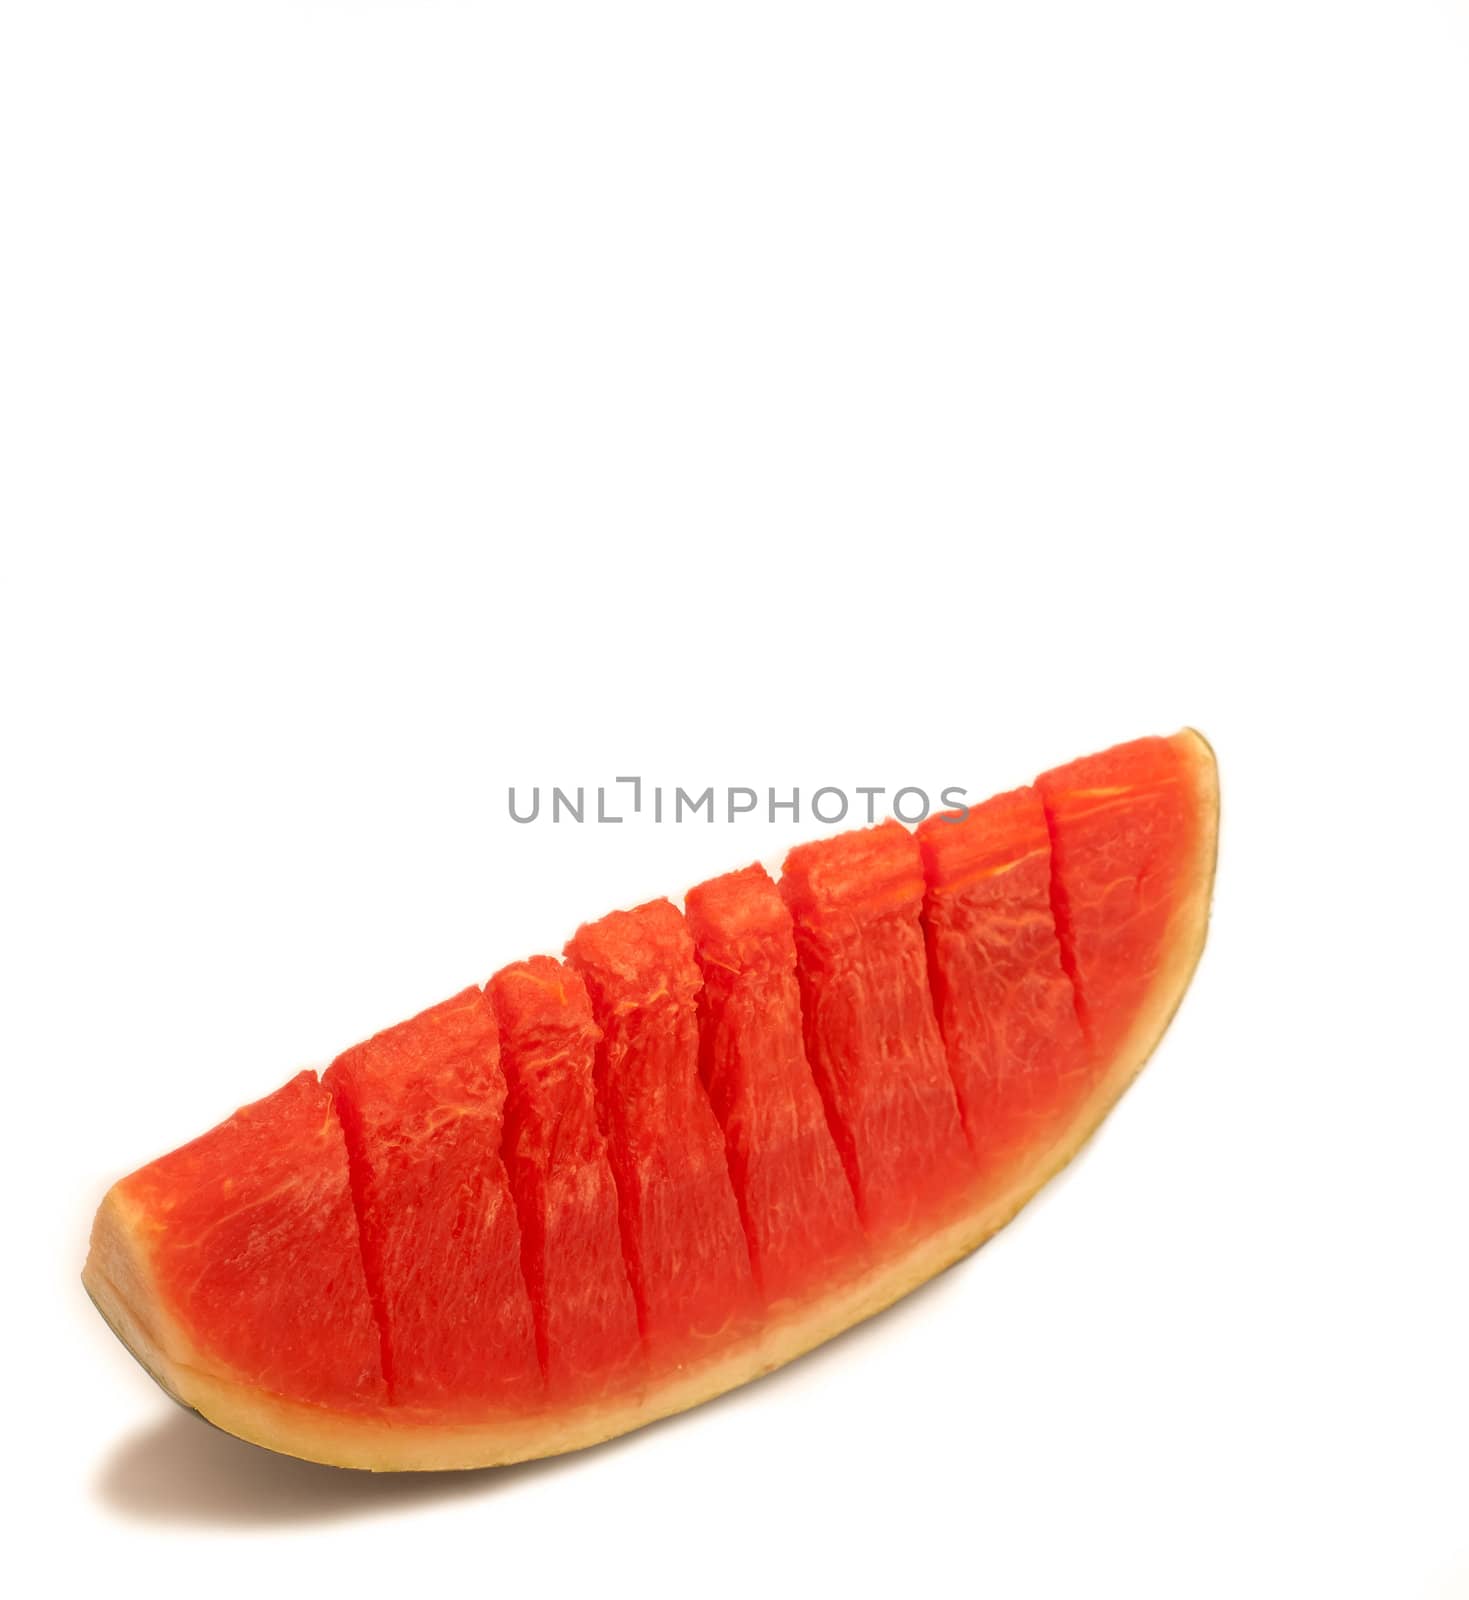 Red watermelon seedless in section on white isolated background.